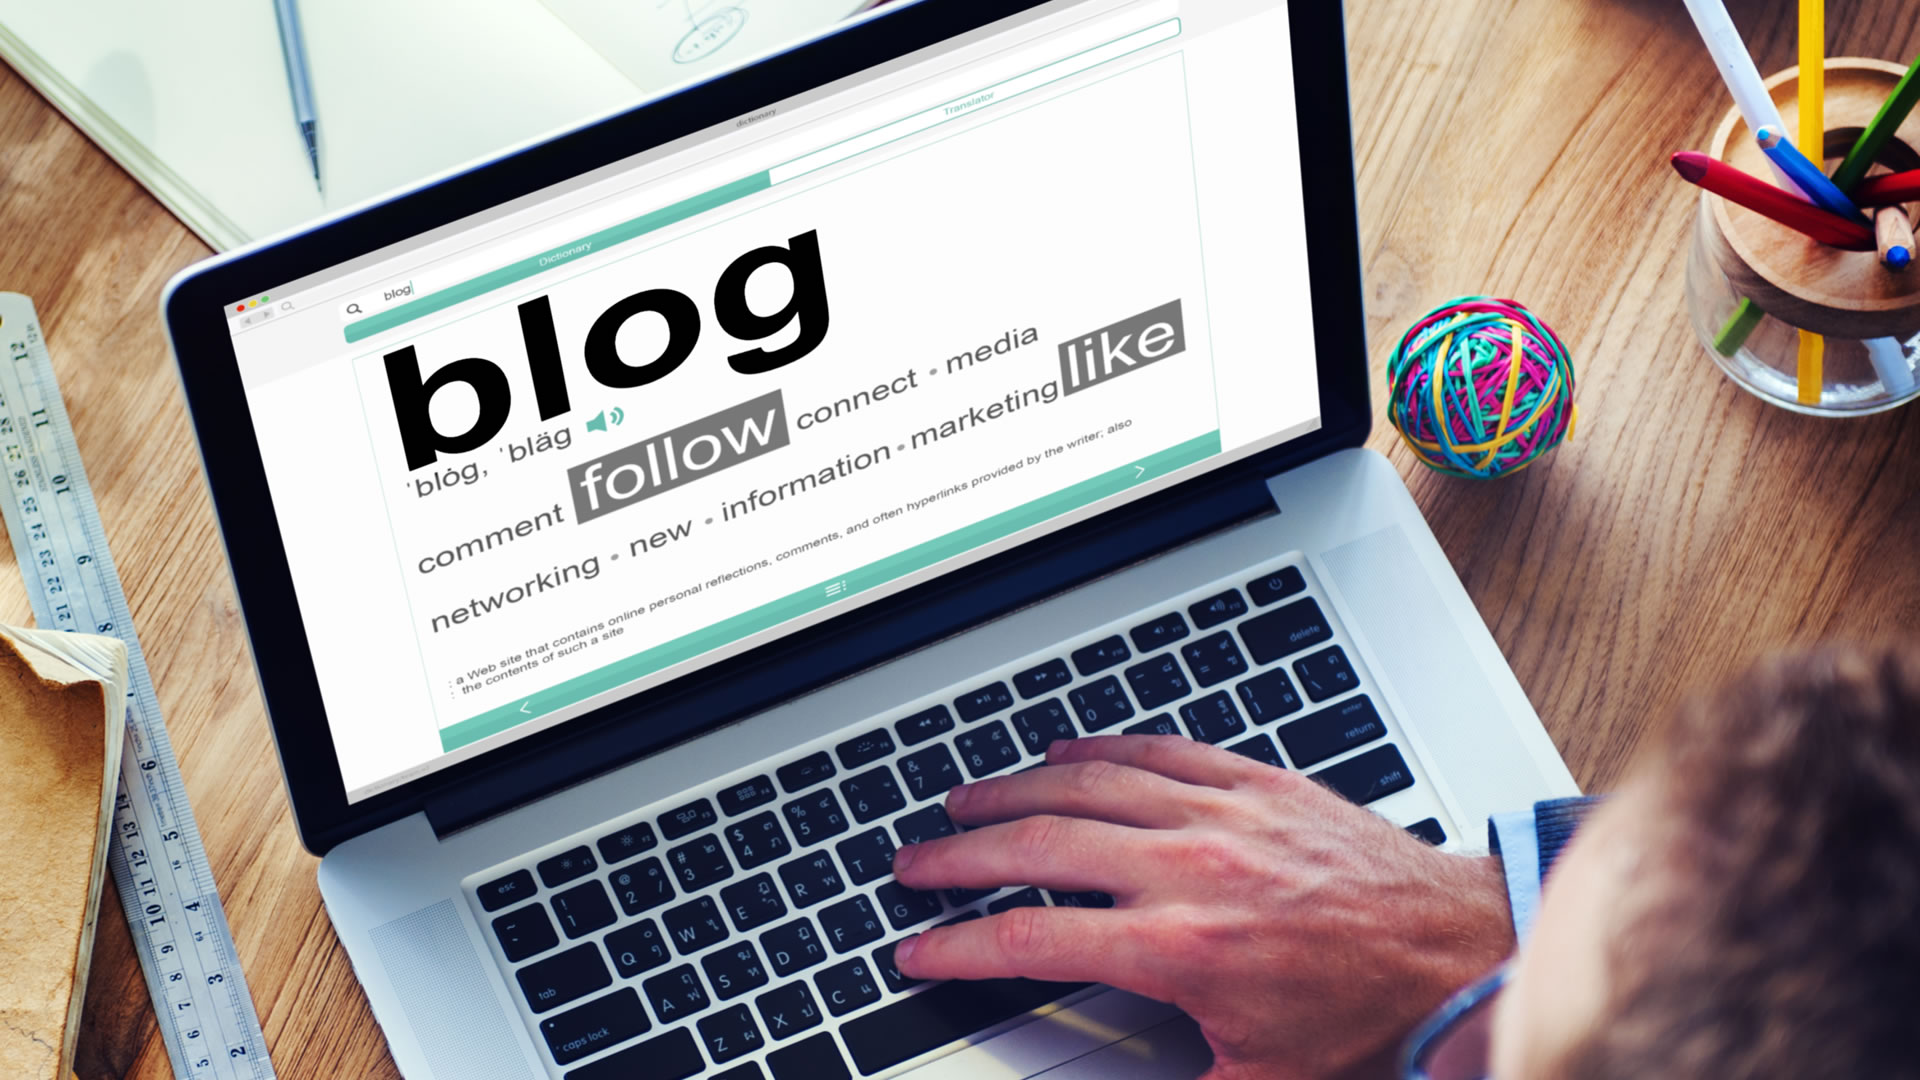 Make the Blog More Attractive and Standout